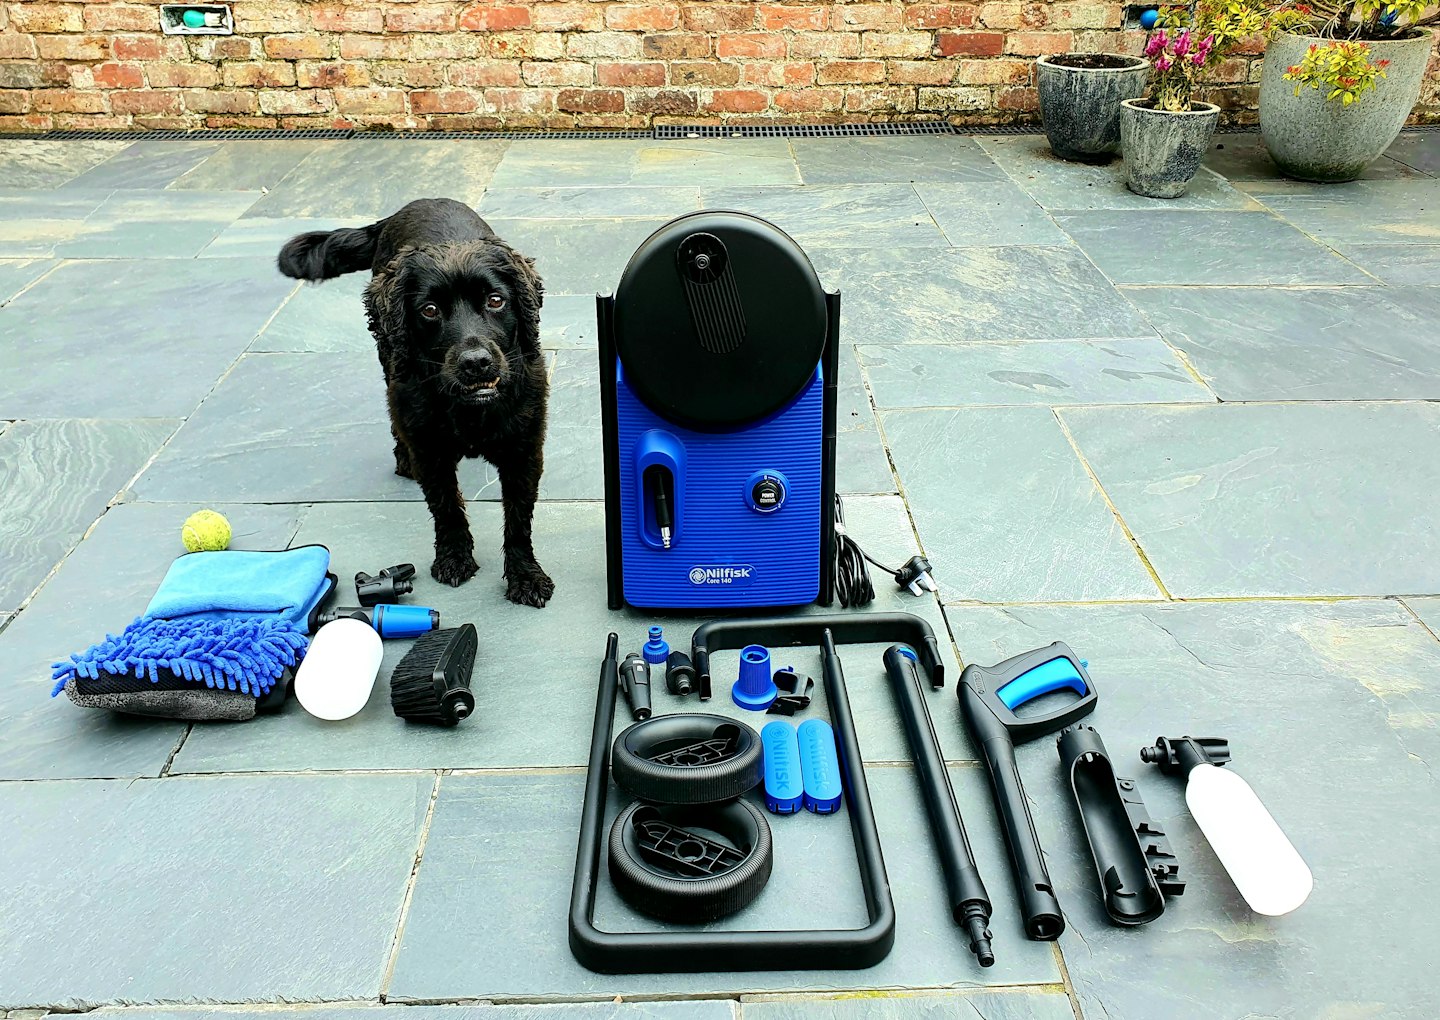 Nilfisk pressure washer before assembly with dog helper